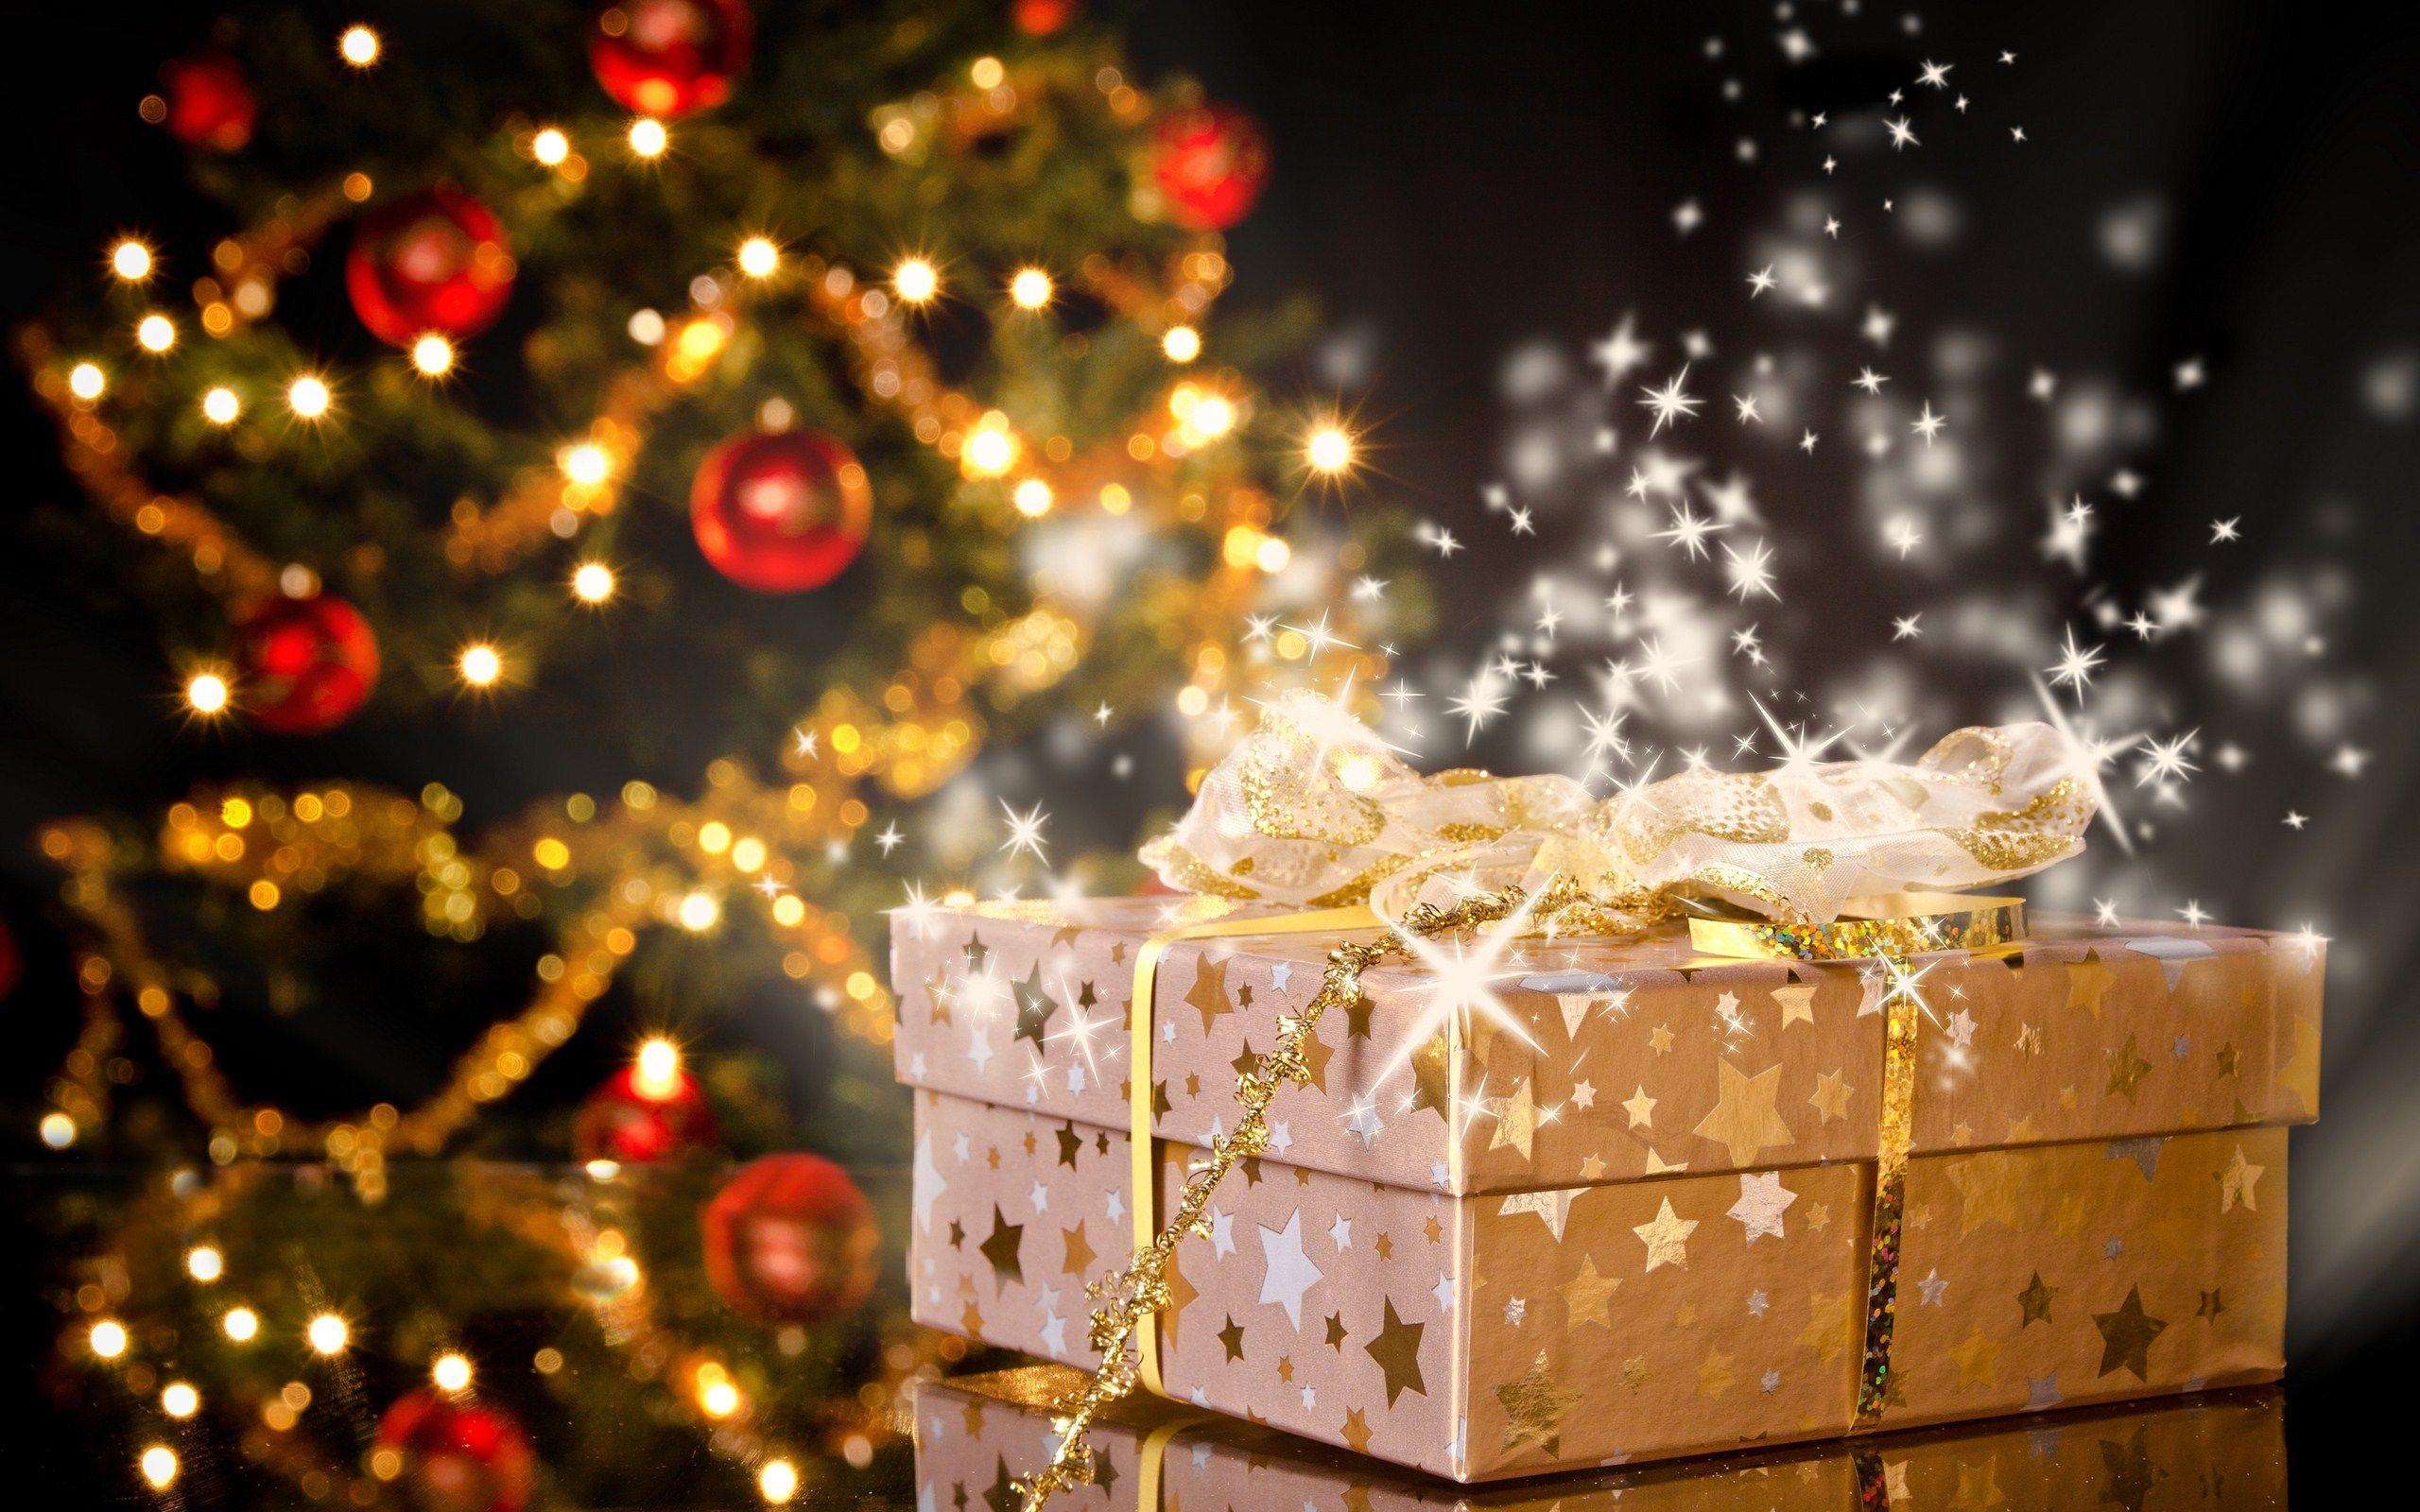 Christmas Gifts Wallpaper Background 8155 2560x1600